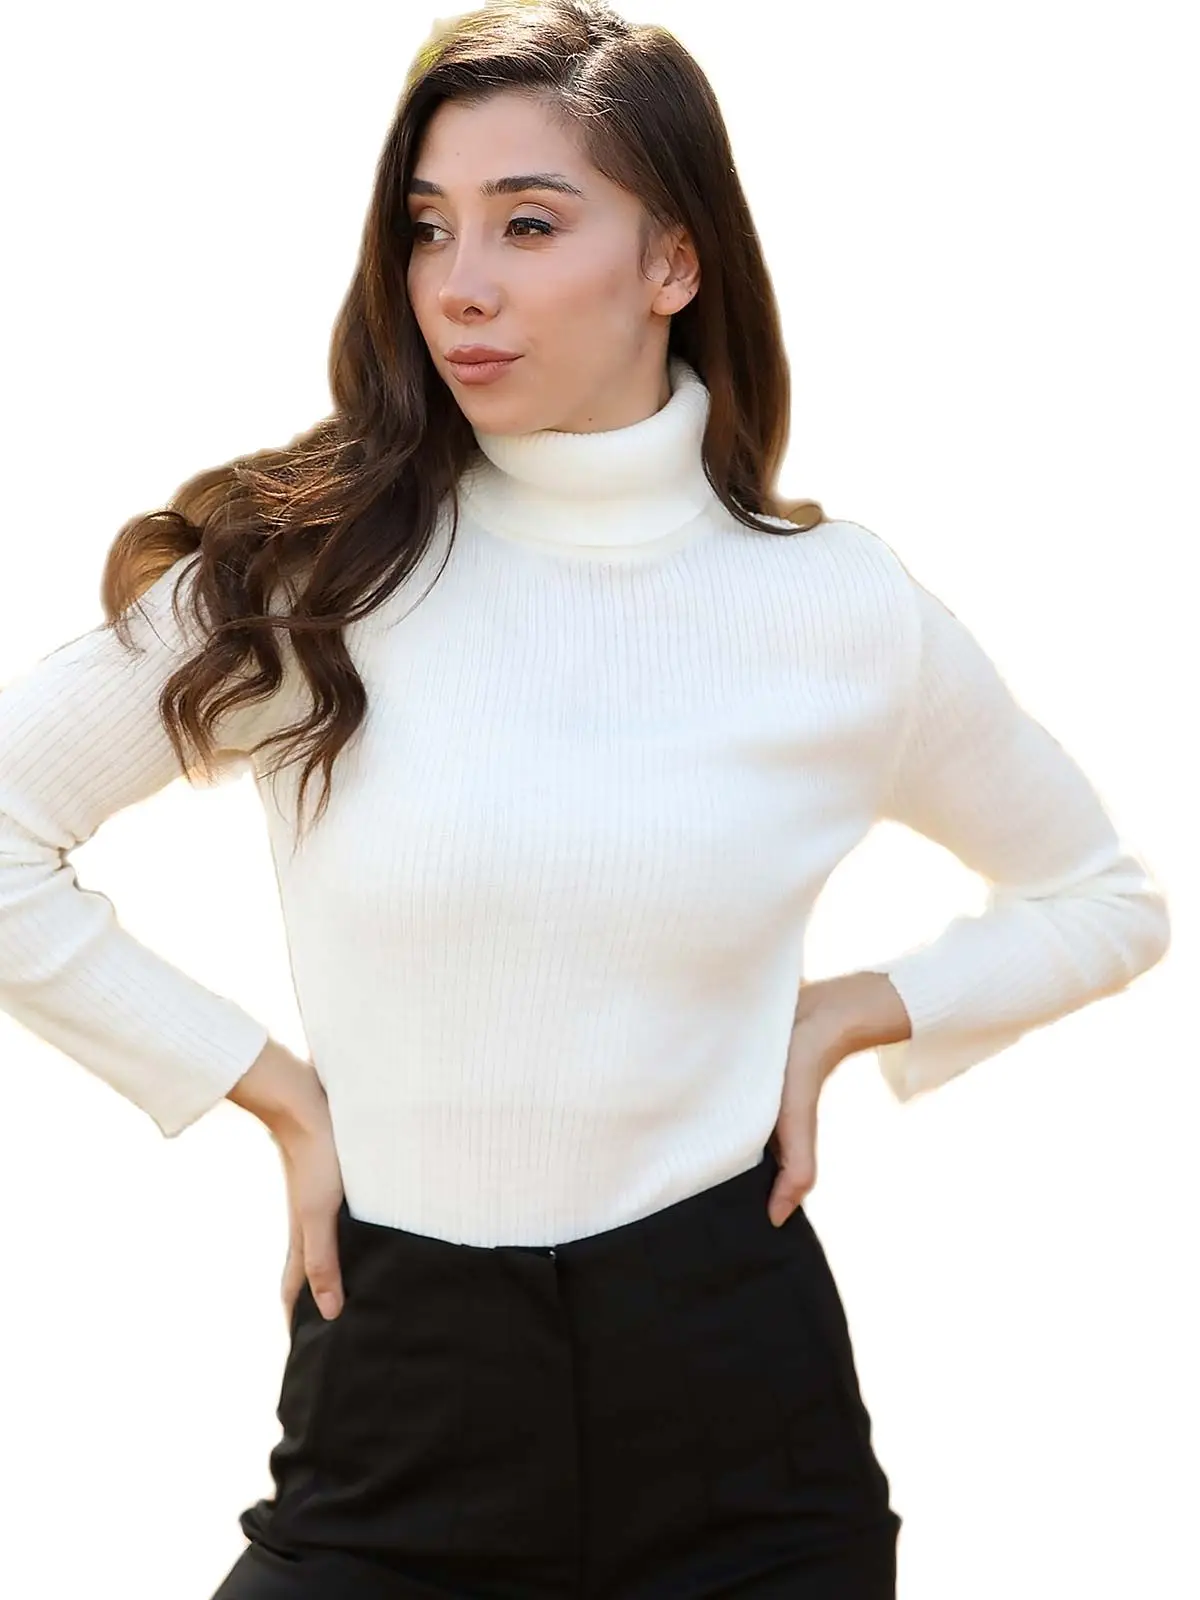 

Turtleneck Sweater Women Autumn Winter Season 2021 Fashion Sexy Hot Casual Lady Outside Acrylic Fabric Pullovers Jumpers Comfort